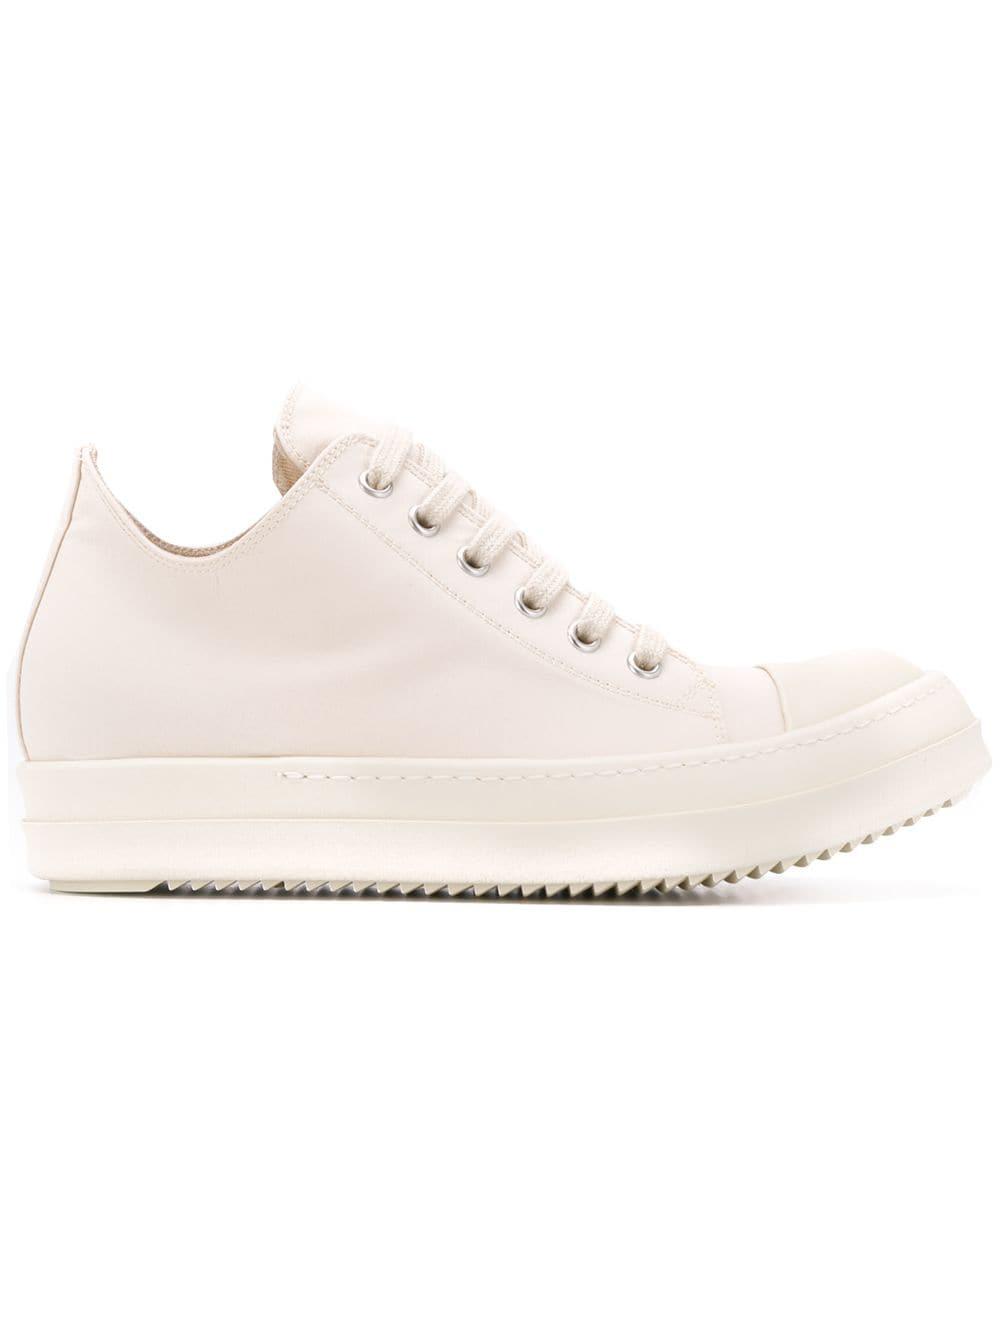 Rick Owens Drkshdw Leather Low Top Trainers in White for Men - Lyst